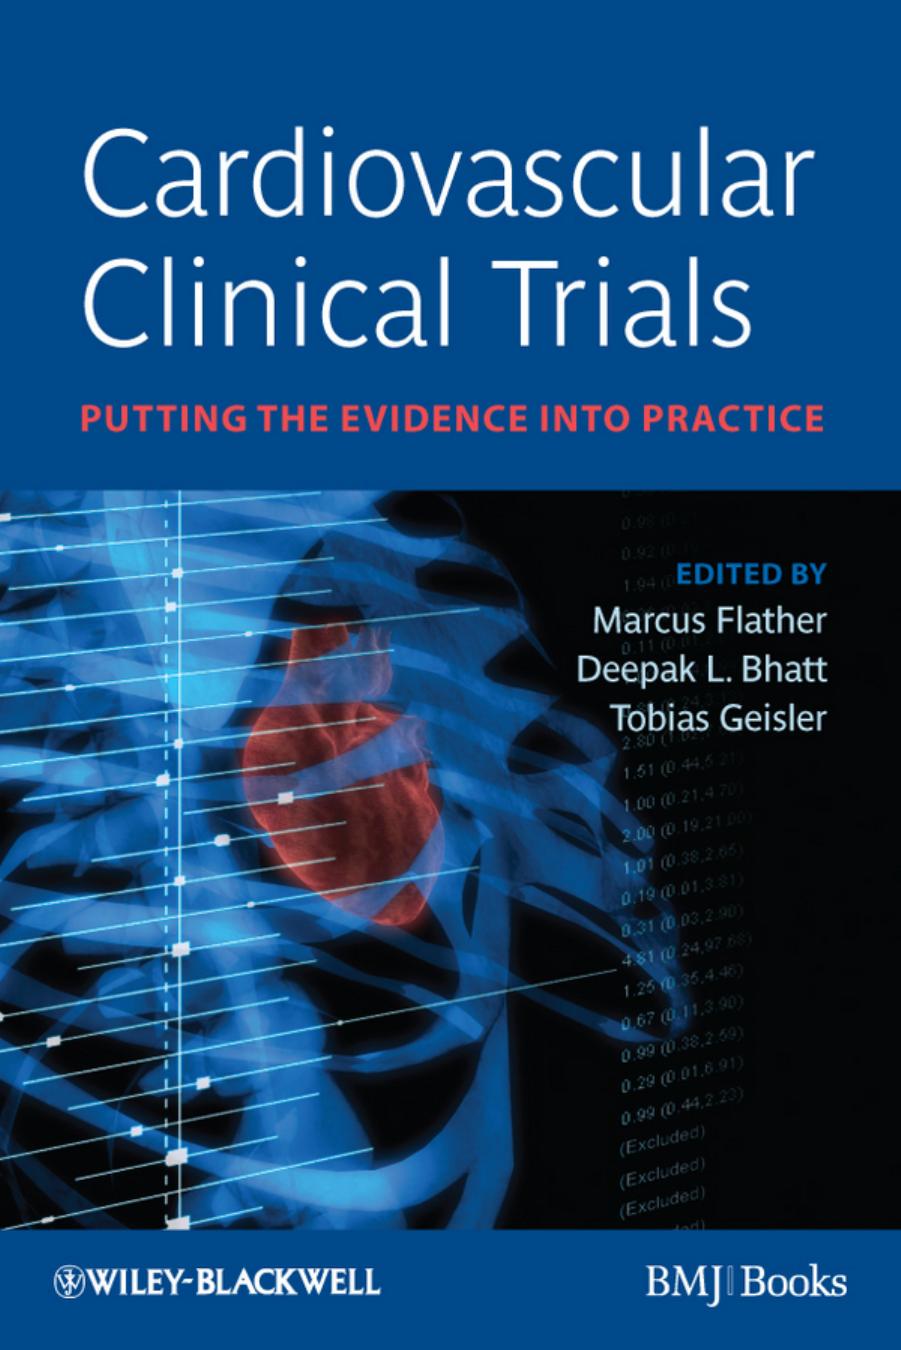 Cardiovascular Clinical Trials Putting the Evidence into Practice - Flather, Marcus(Editor).jpg